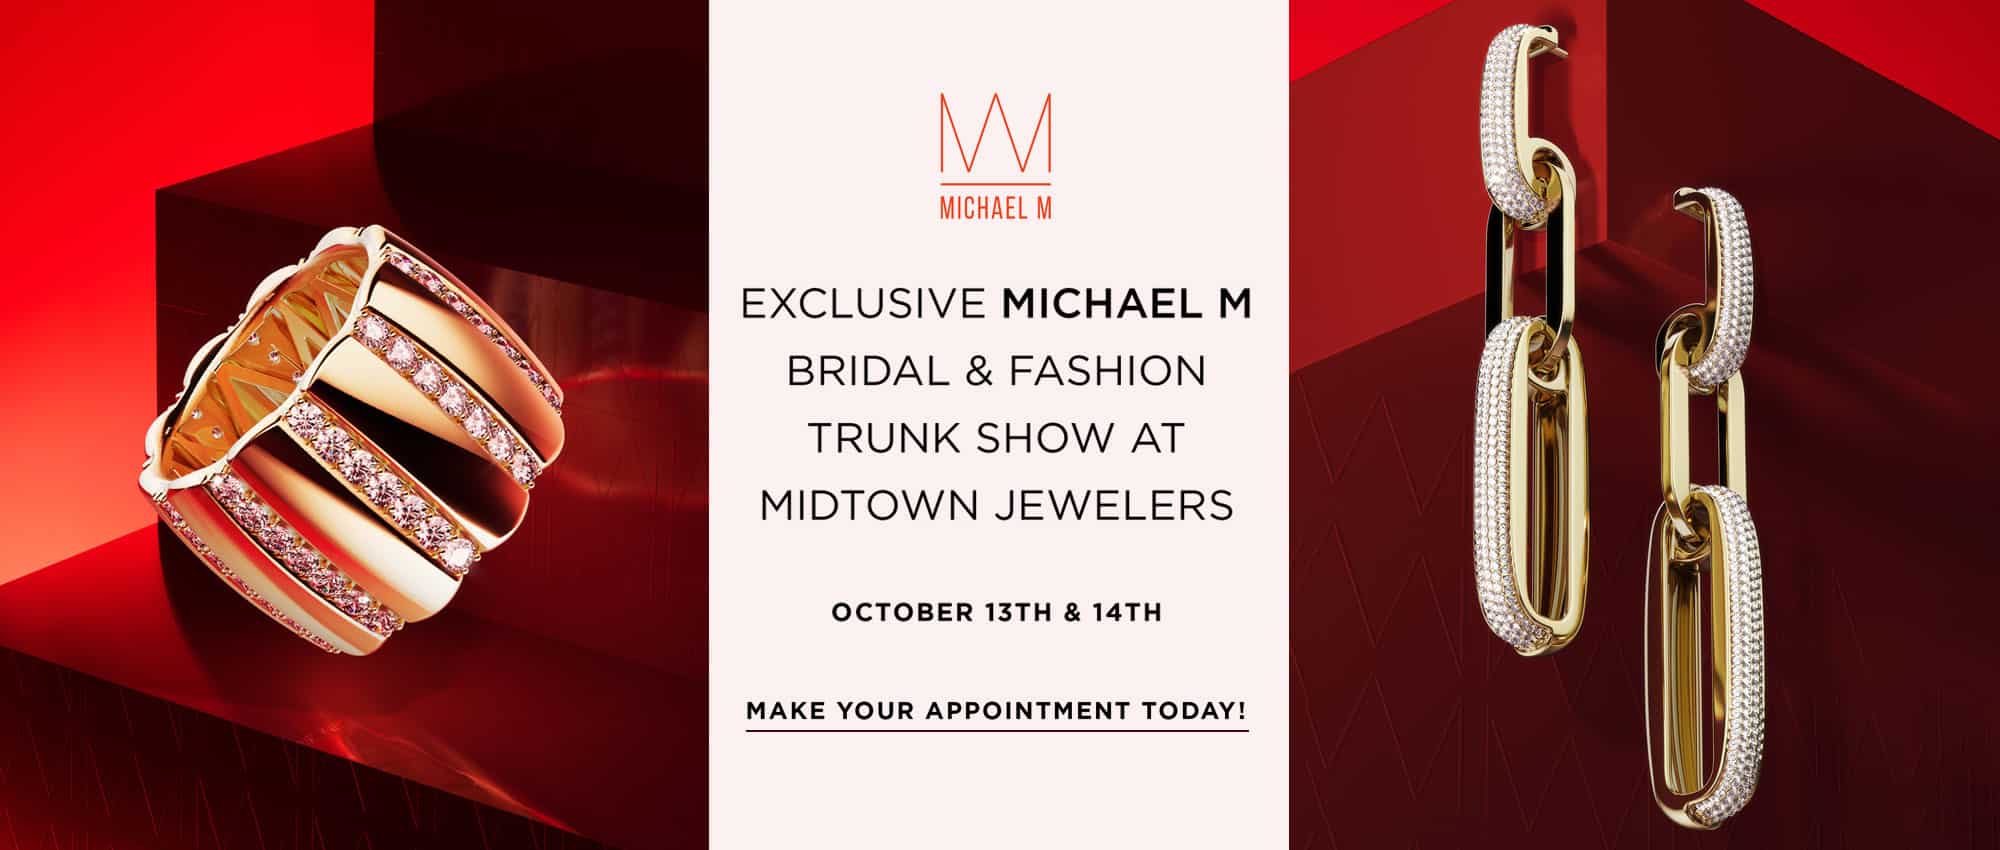 Jewelry Trunk Show At Midtown Jewelers At Midtown Jewelers